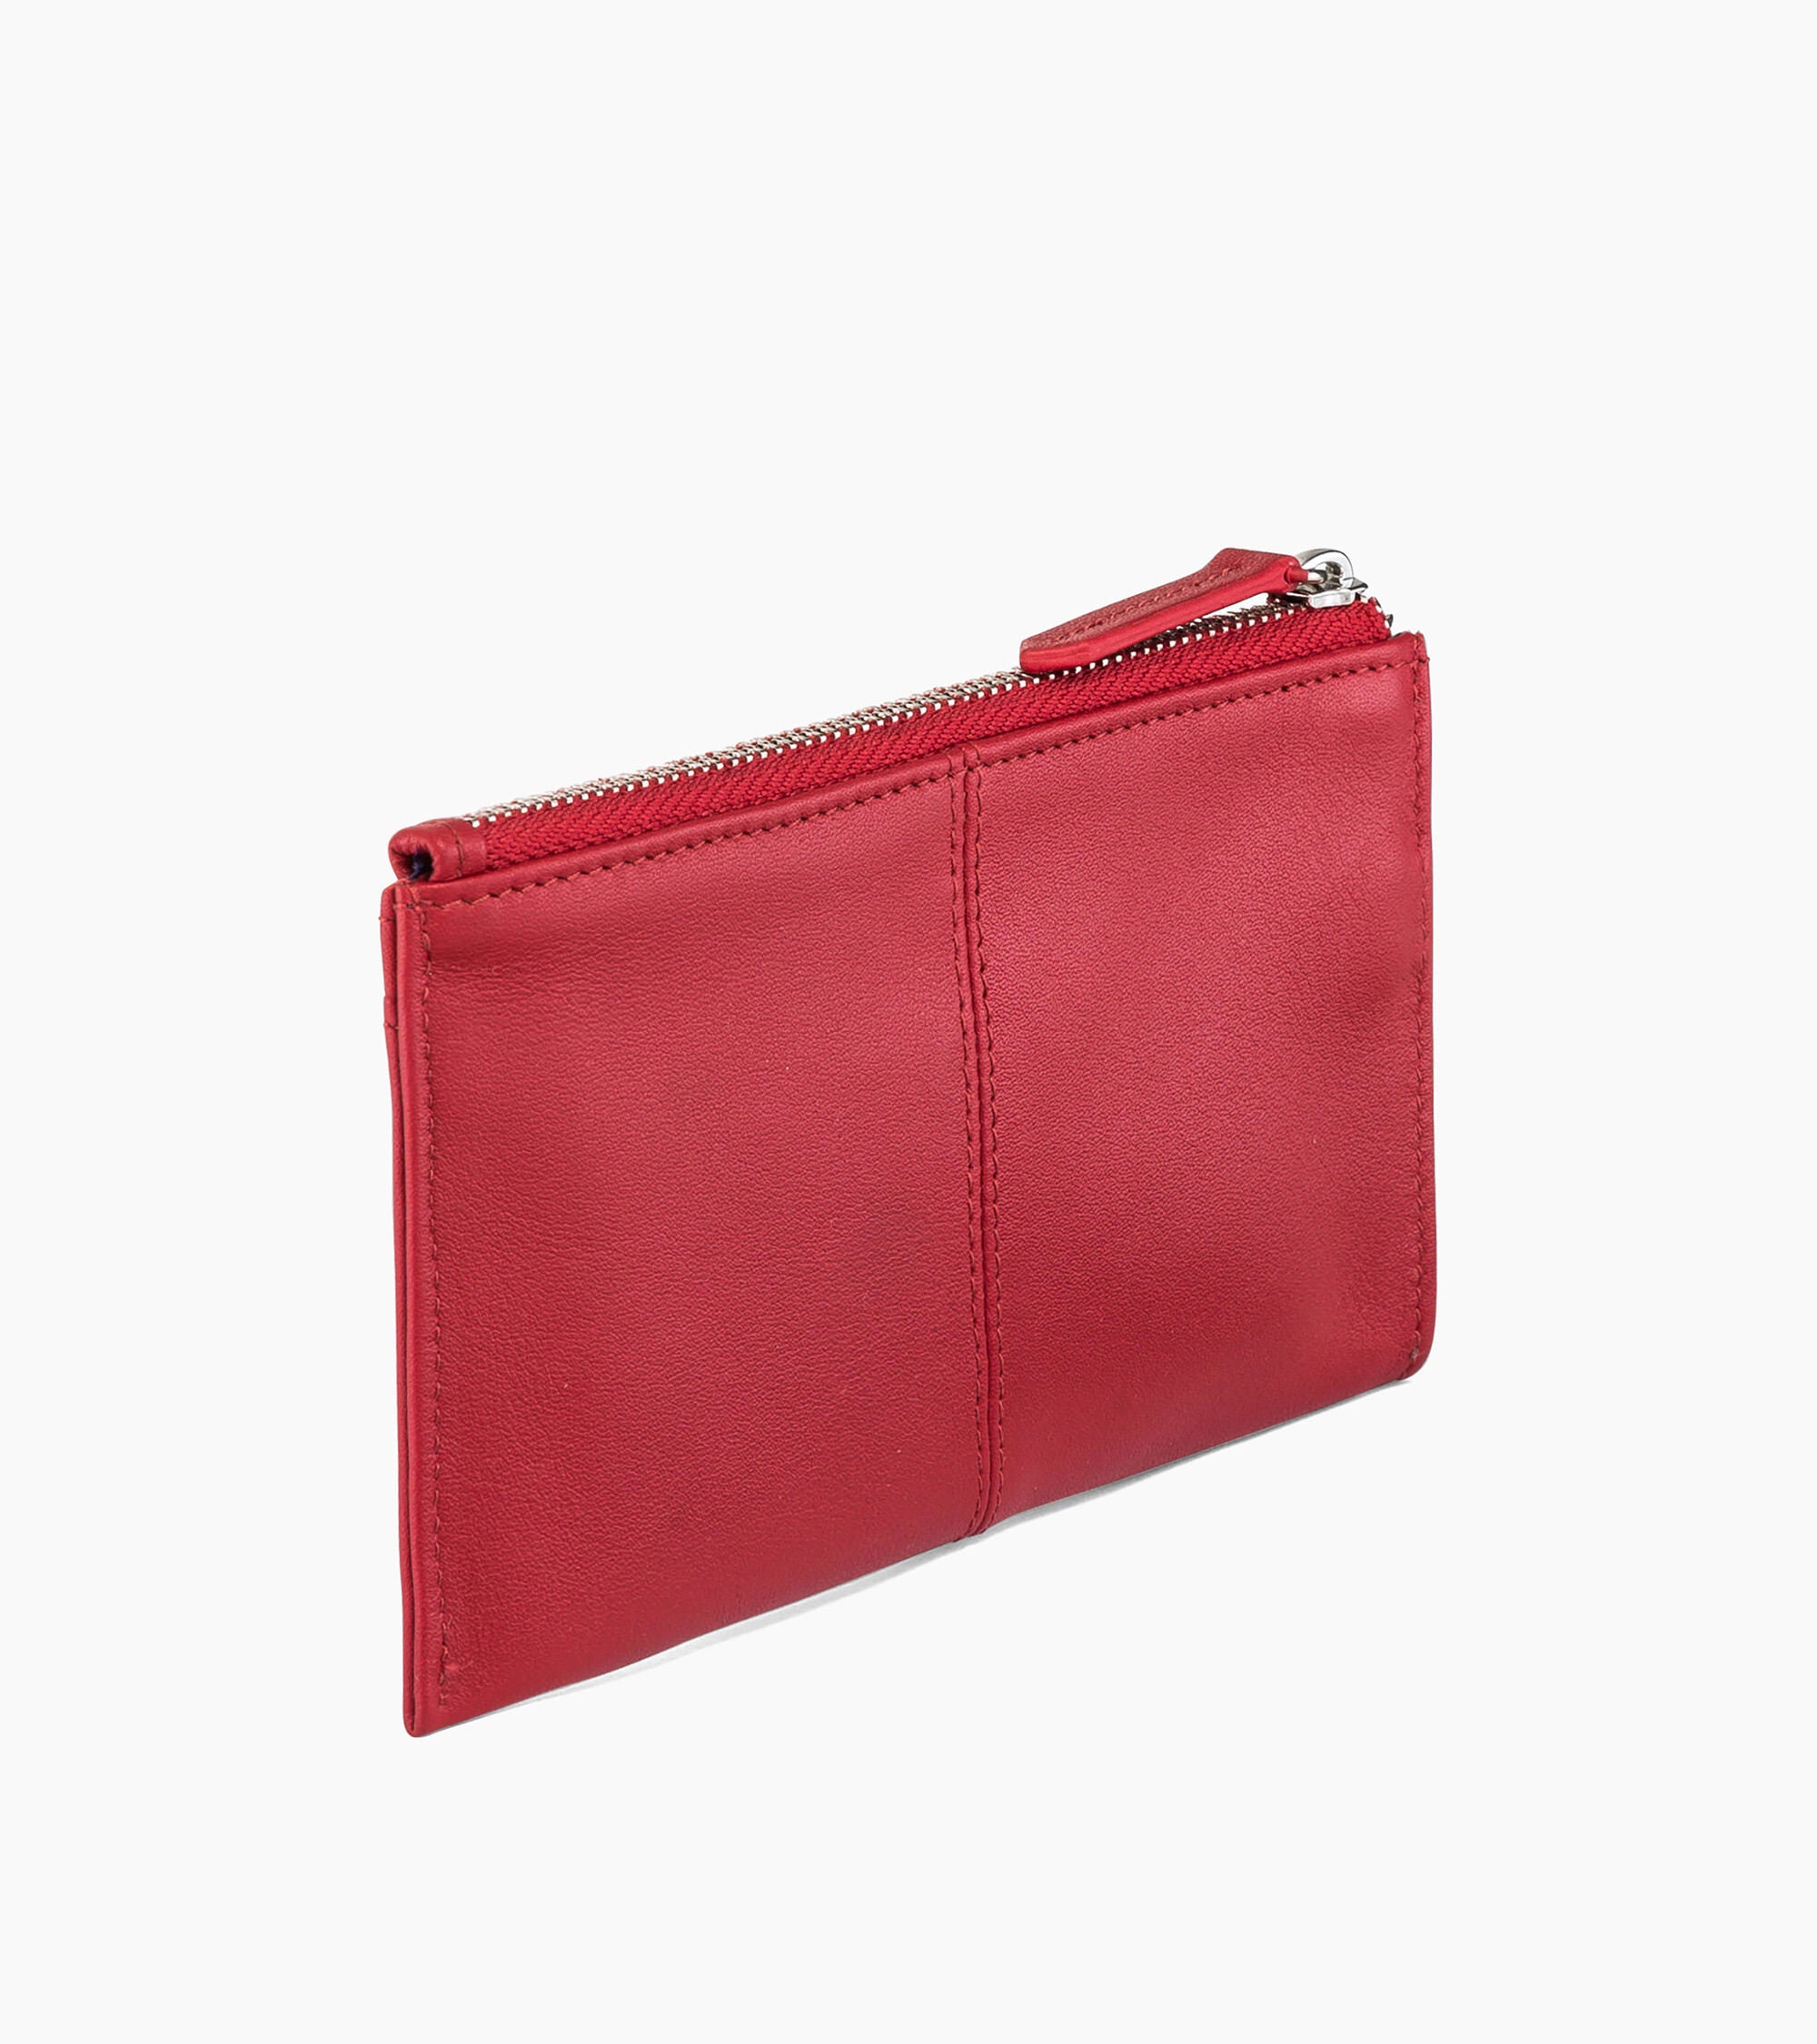 Zipped Charlotte smooth leather key pouch